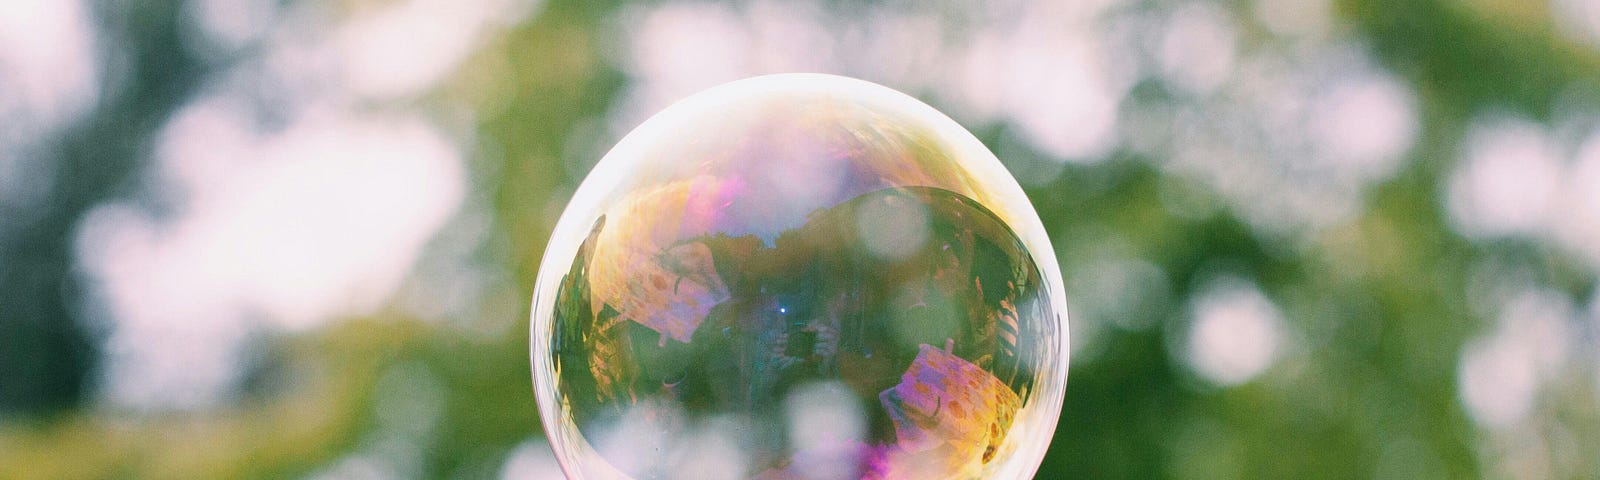 A single soap bubble floating in front of a blurred green background.